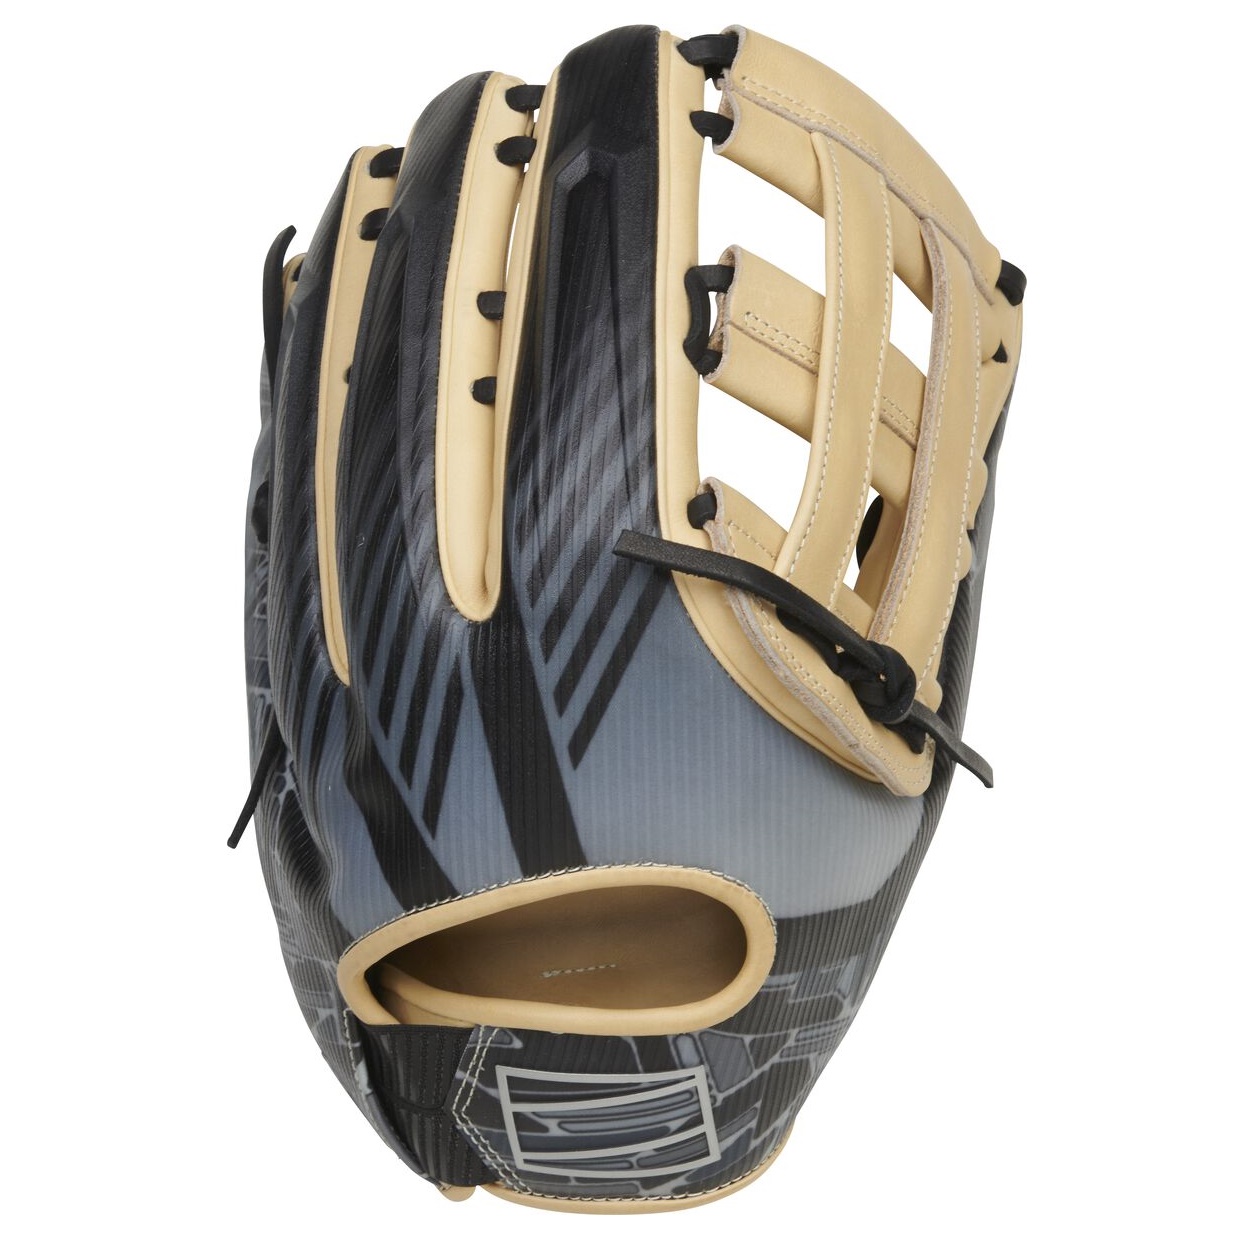 rawlings-rev1x-12-75-baseball-glove-3039-right-hand-throw REV3039-6-RightHandThrow   This Rawlings REV1X 12.75 inch baseball glove is a top-of-the-line piece